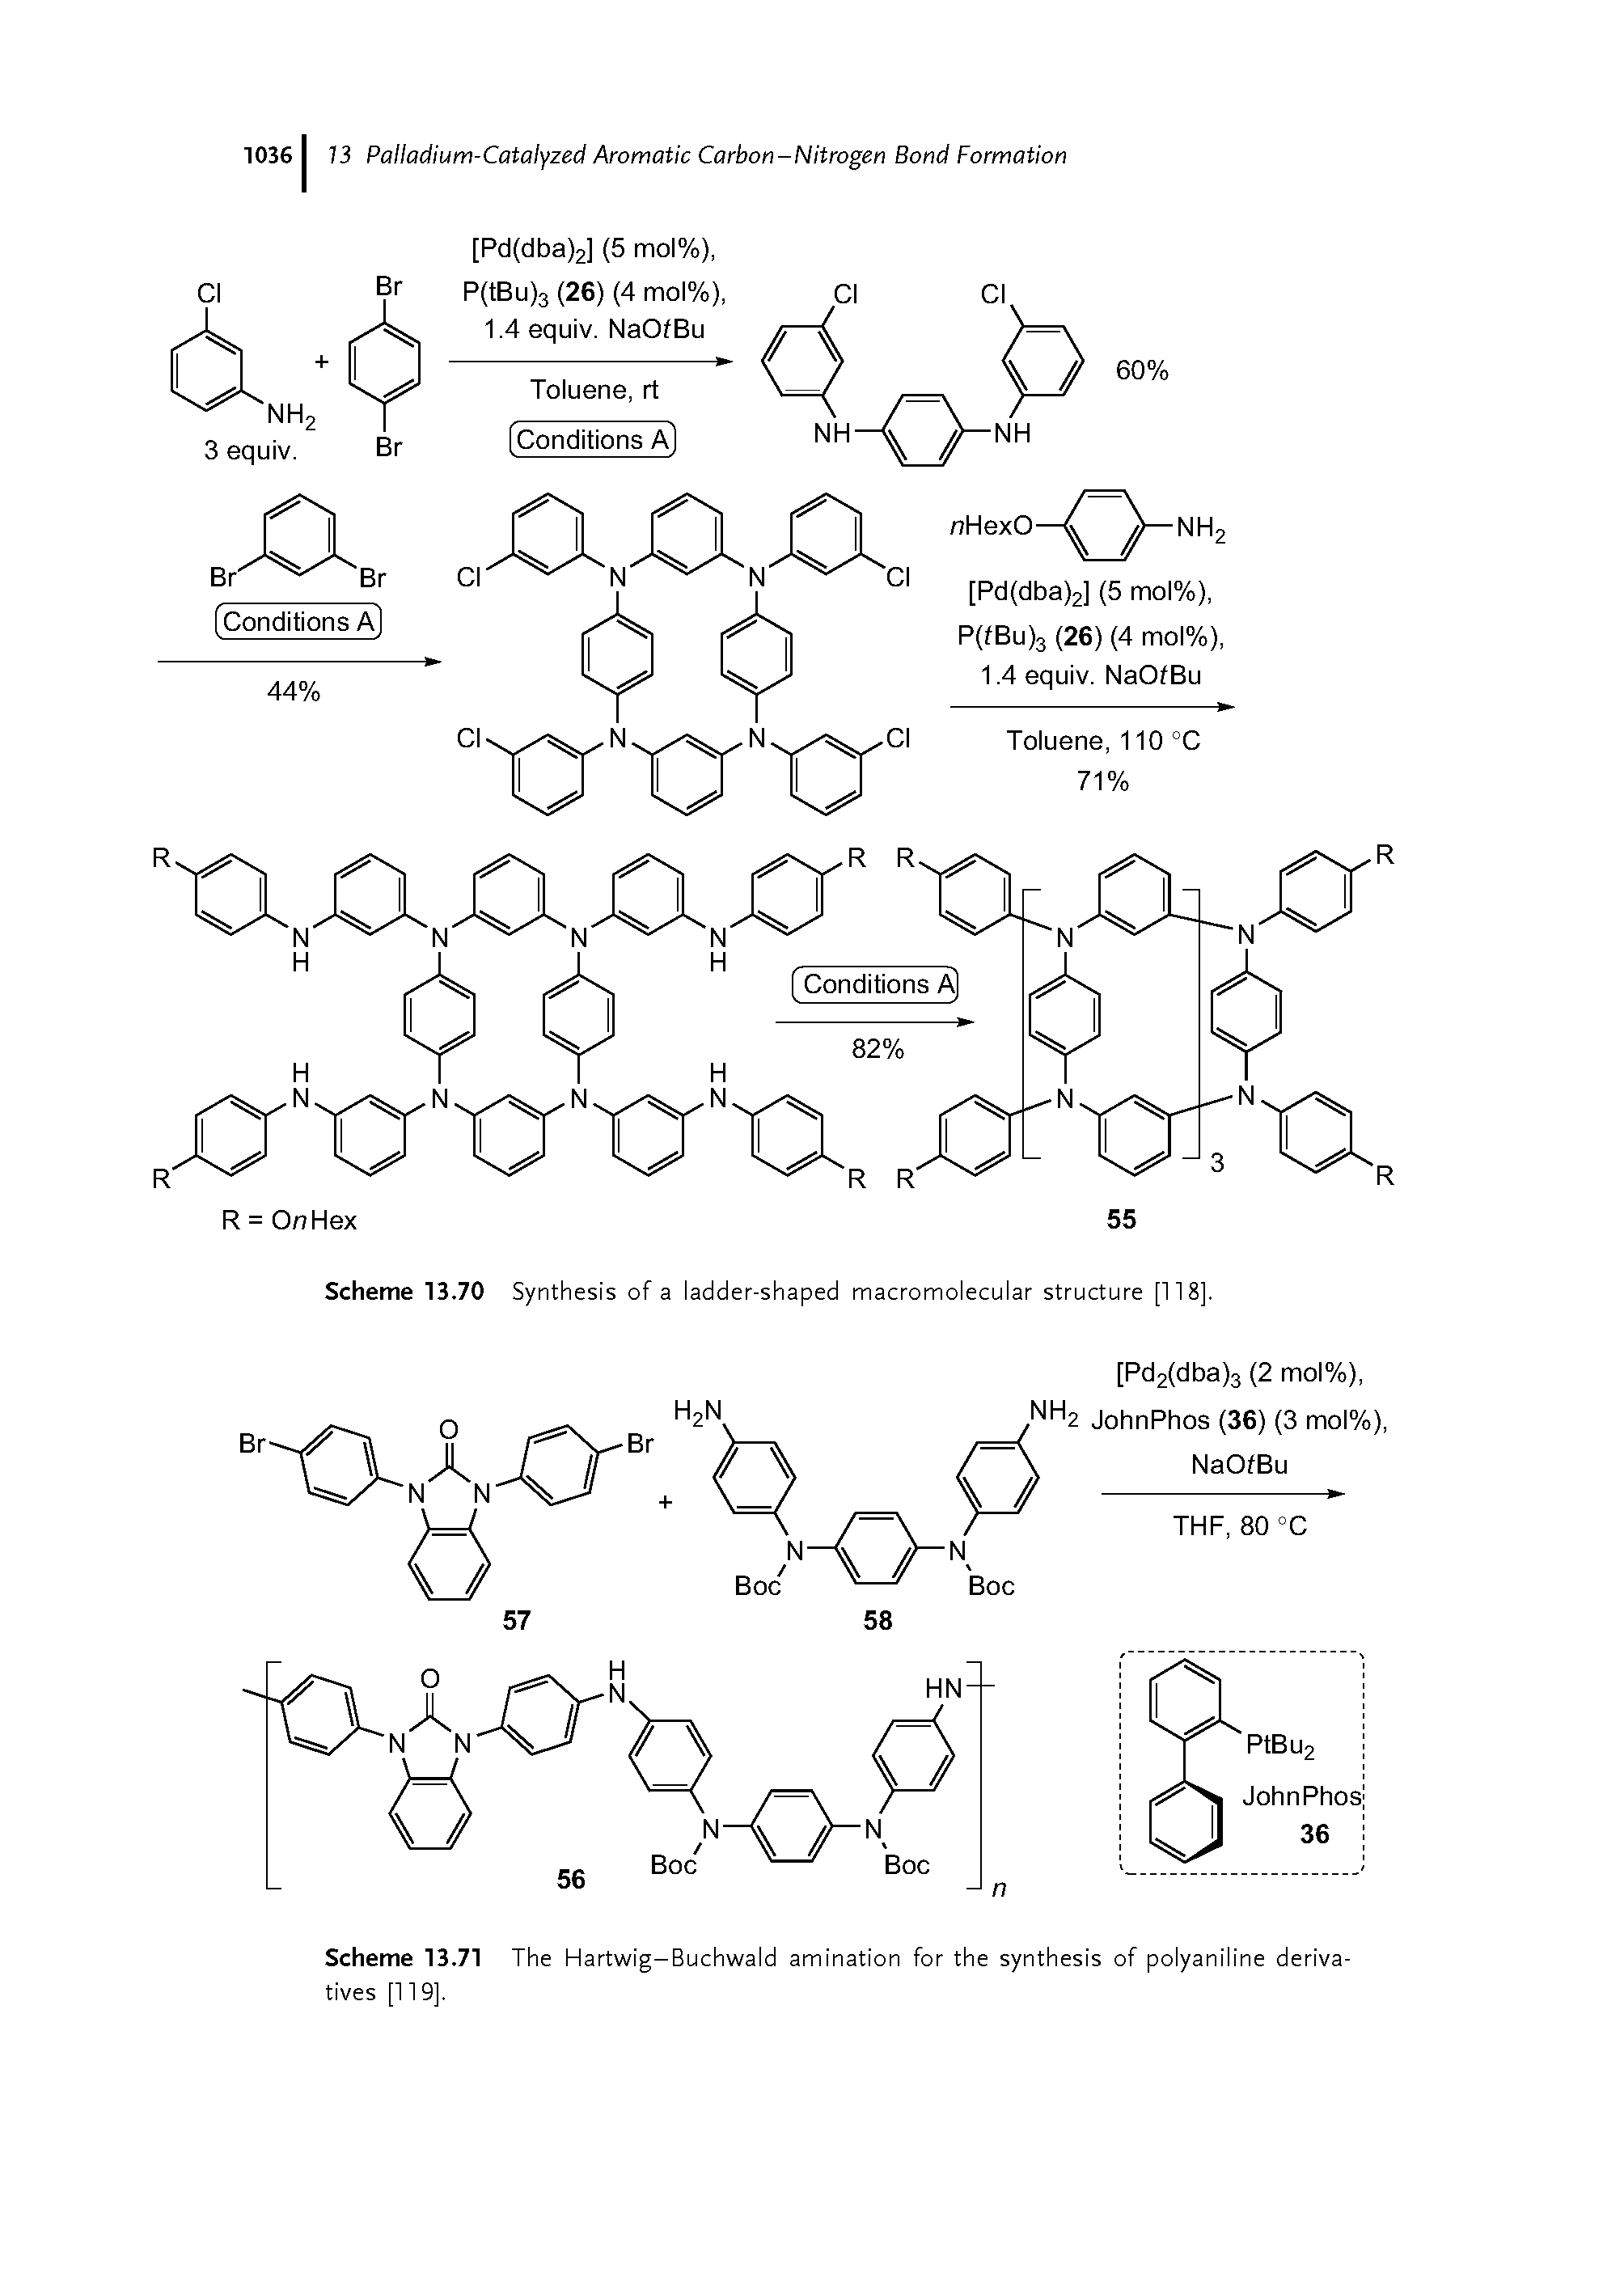 Scheme 13.71 The Hartwig-Buchwald amination for the synthesis of polyaniline derivatives [119],...